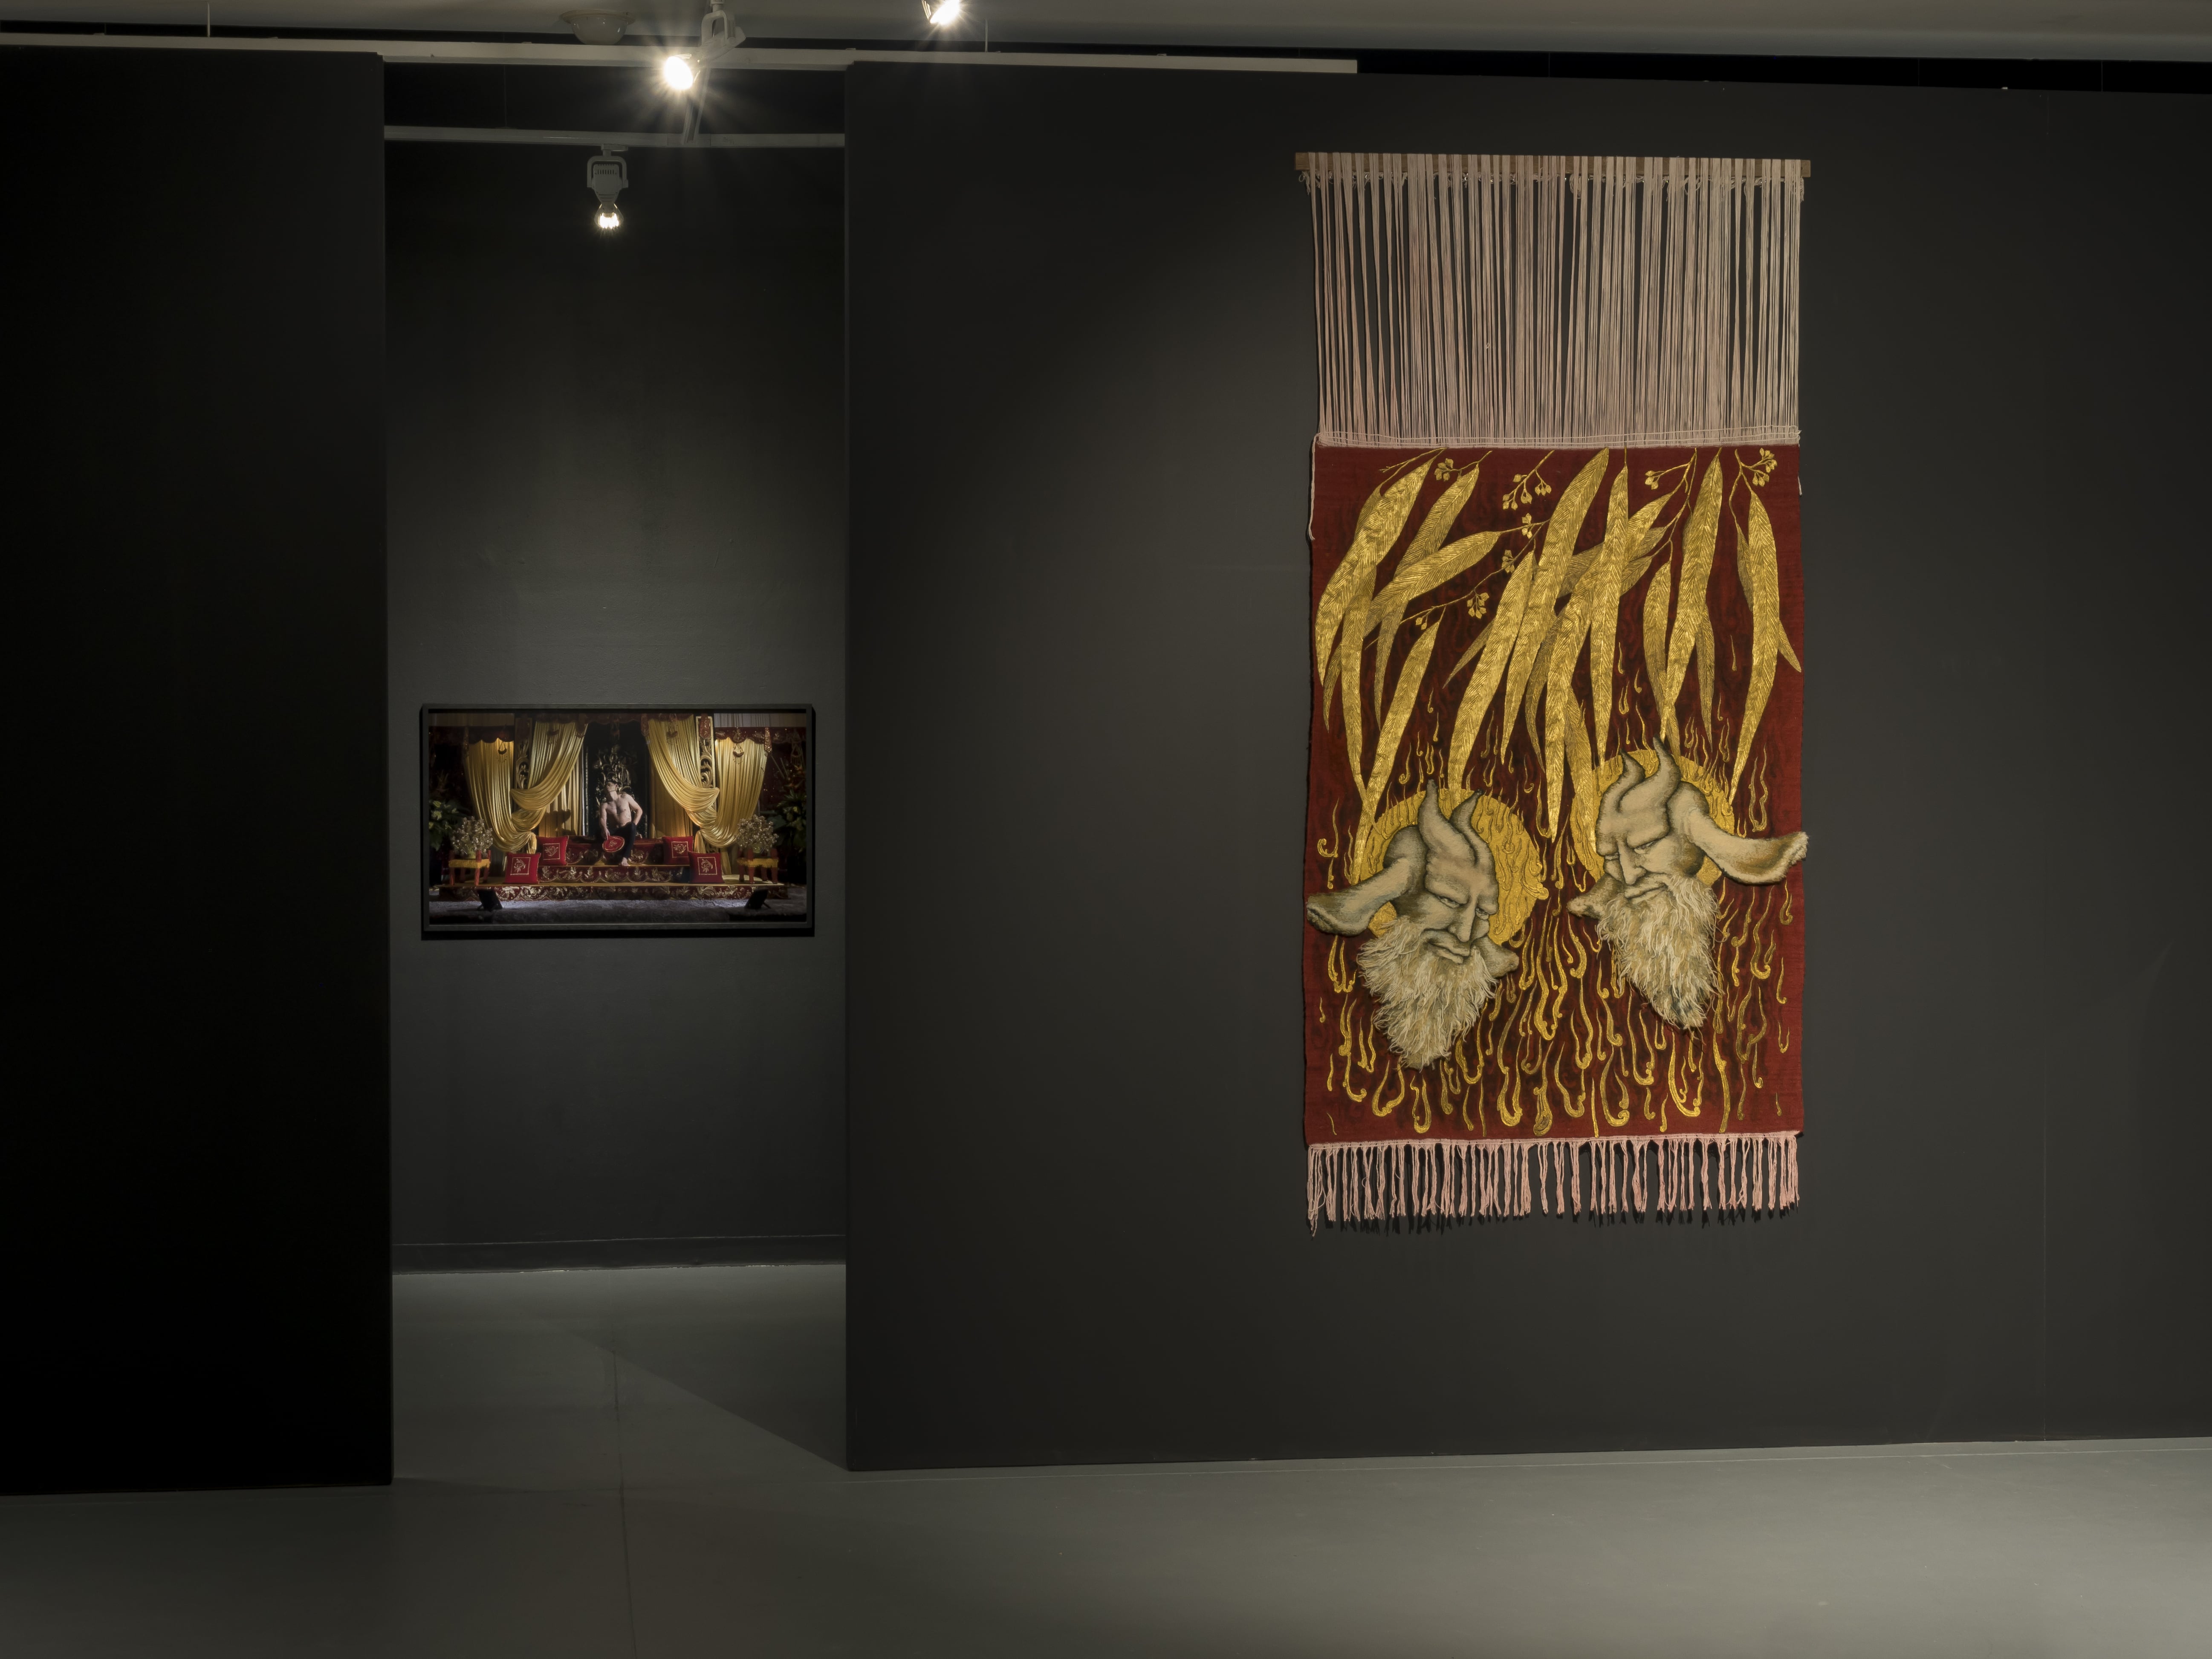 Image 04: Waqt al-tagheer: Time of change (2018), exhibition view.